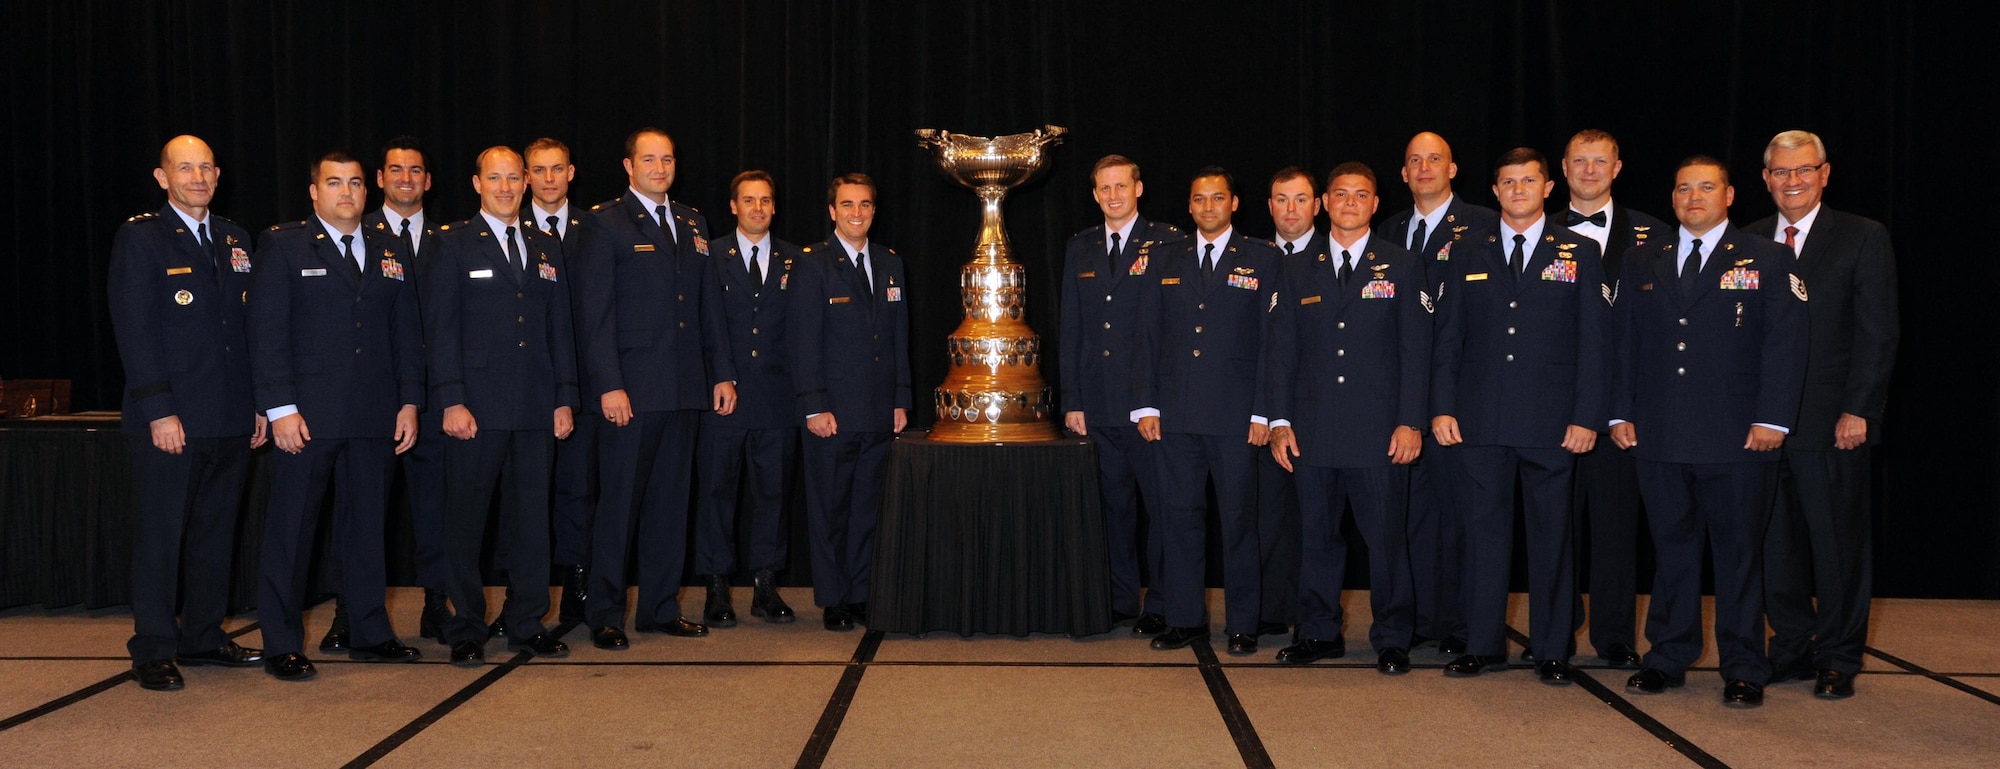 Members of Rooster 73 Flight pose for a group photo after being presented the 2013 Mackay Trophy for the most meritorious flight of the year at the National Aeronautic Association Fall Awards Dinner Nov. 5, 2014 in Arlington, Va. Three 920th Rescue Wing pararescuemen were part of the mission (from left to right, back row, to the left of the trophy), Tech. Sgt. Dan Warren, Staff Sgt. Lee Von Hack-Prestinary and Tech. Sgt. Jason Broline. The crew earned the award for their heroic efforts to safely evacuate American citizens and provide medical care to the passengers who were critically injured when their CV-22 Osprey came under heavy enemy fire during the mission. (Courtesy photo) 